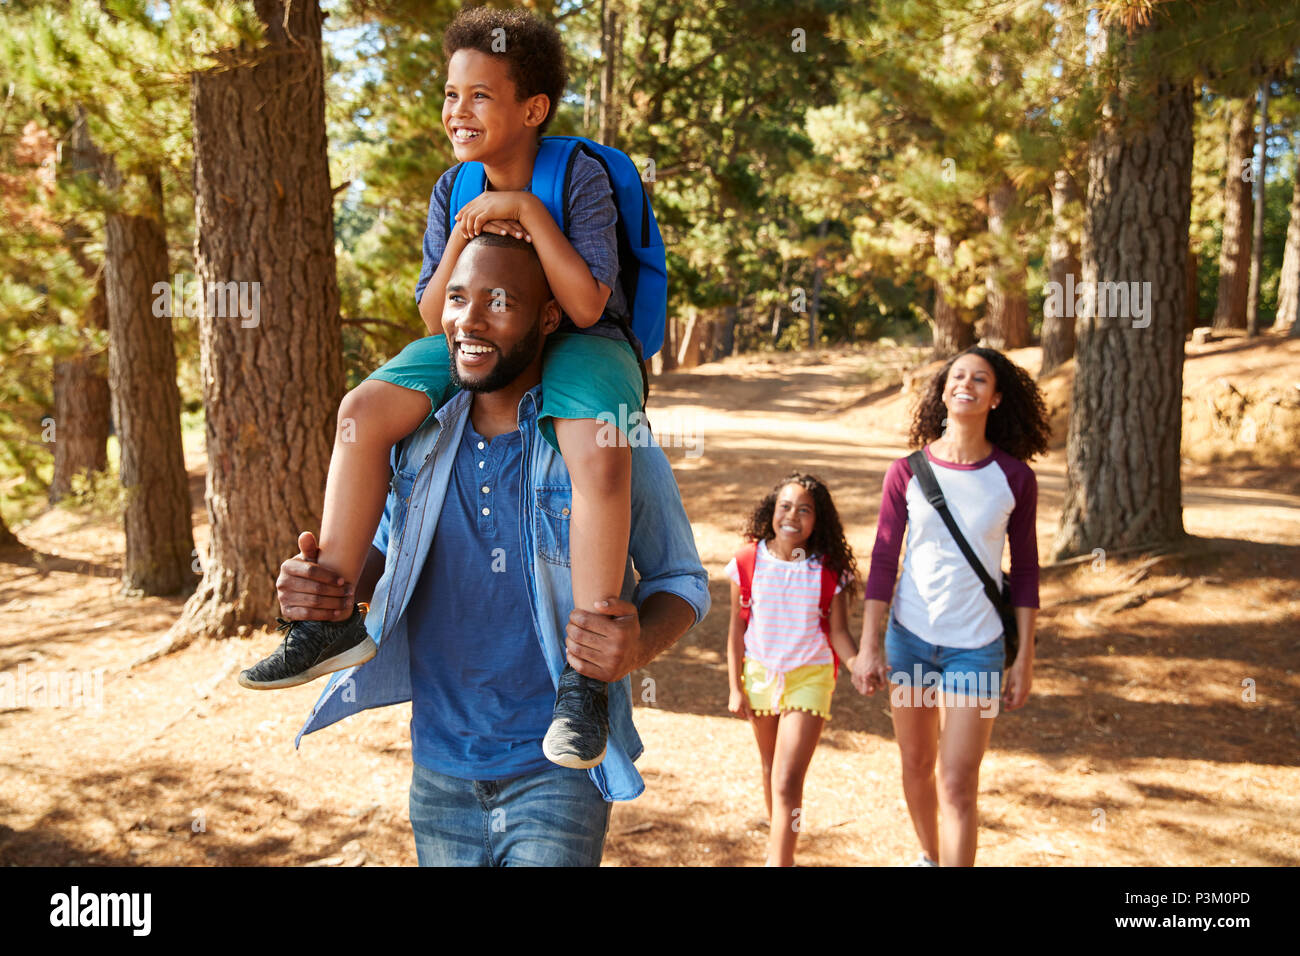 Family On Hiking Adventure Through Forest Stock Photo